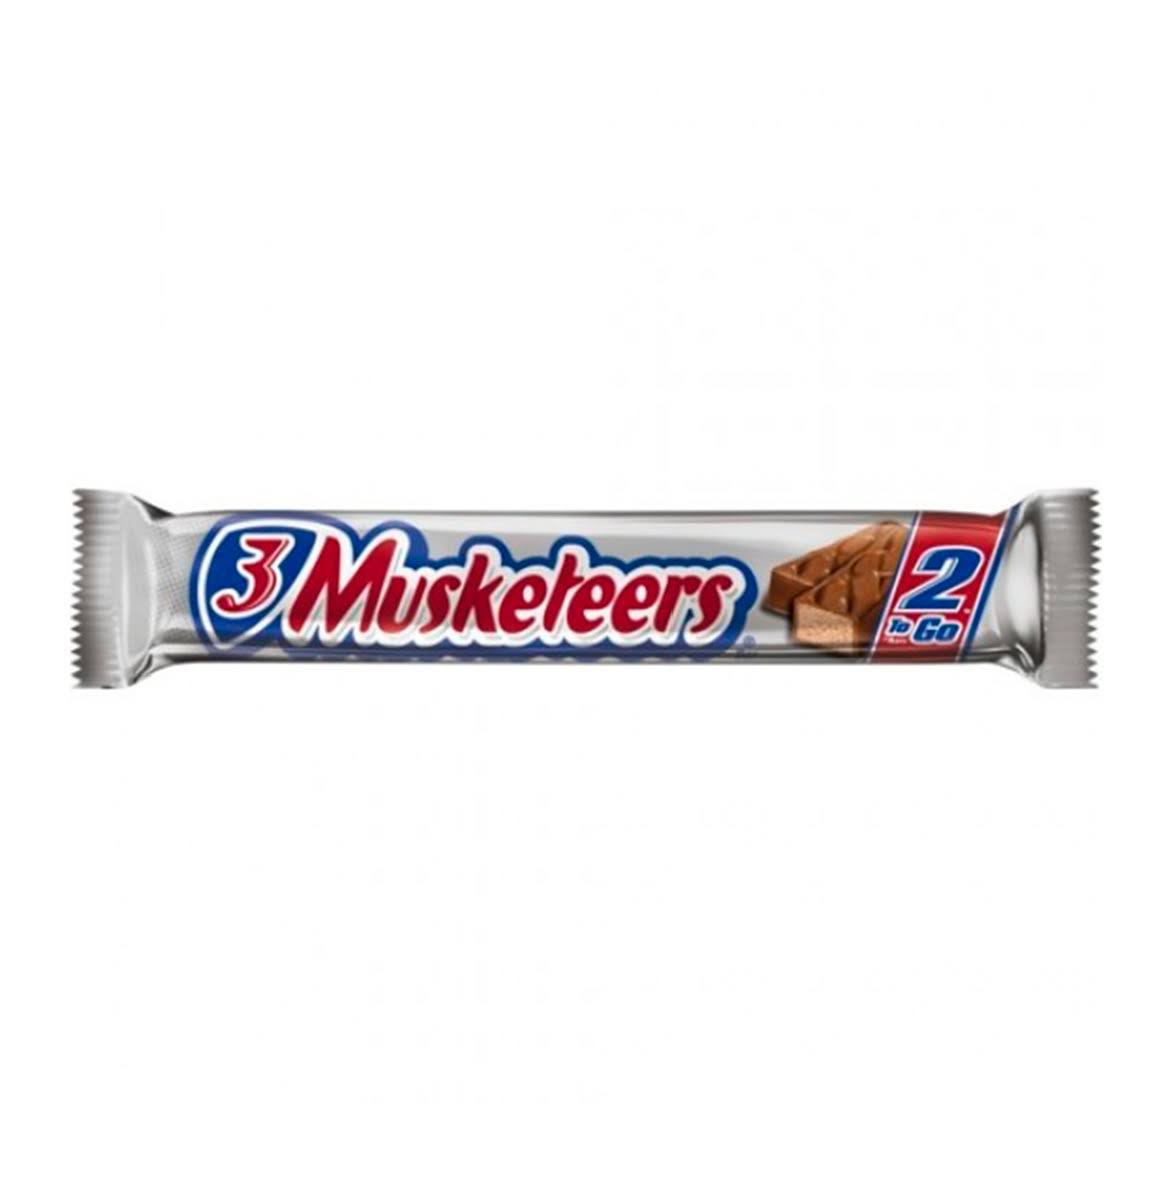 3 Musketeers 2 To Go Bar